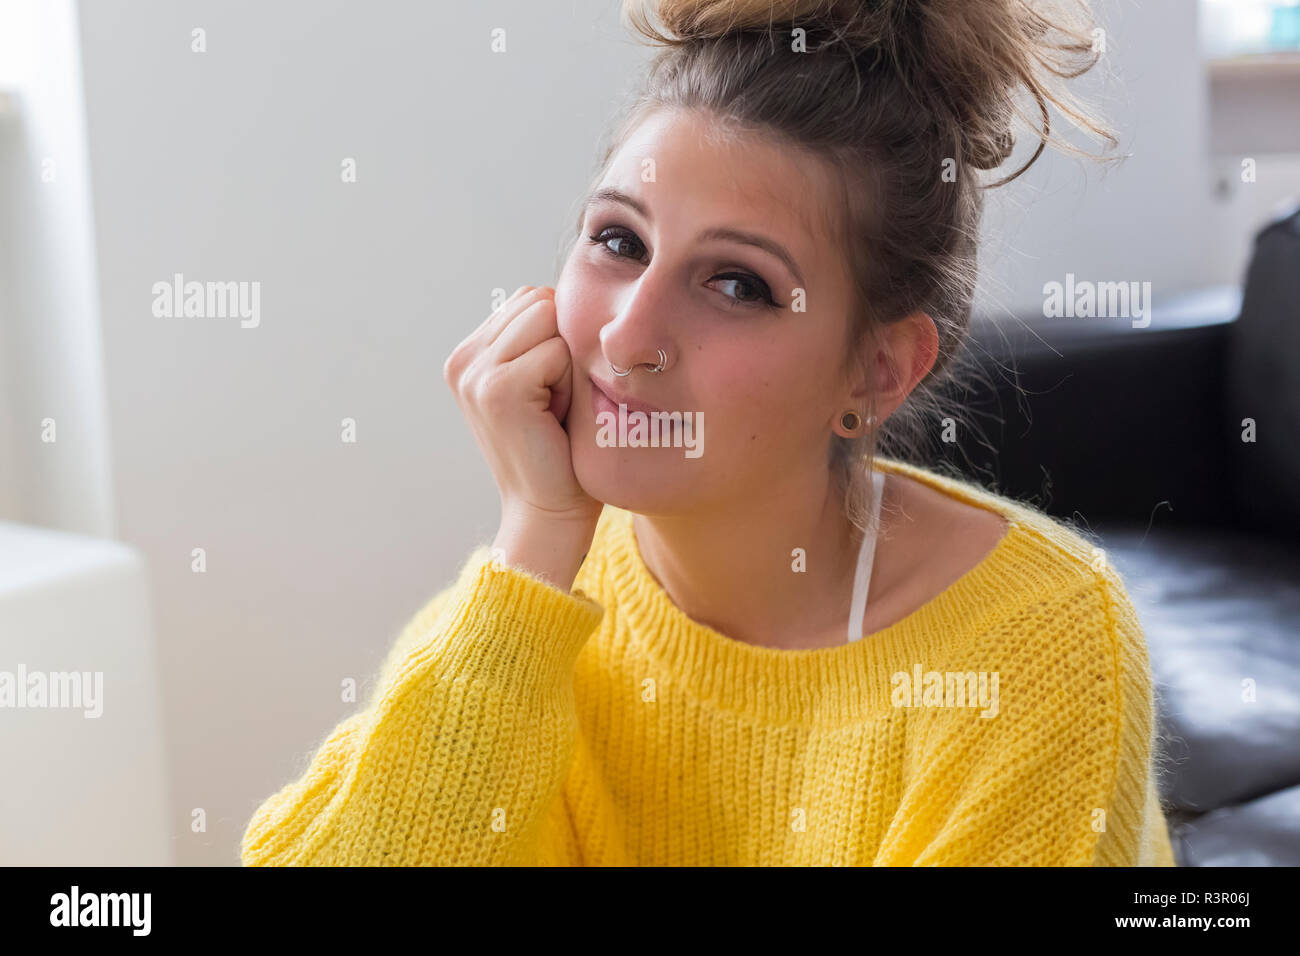 Portrait of smiling young woman with nose piercing wearing yellow pullover Stock Photo